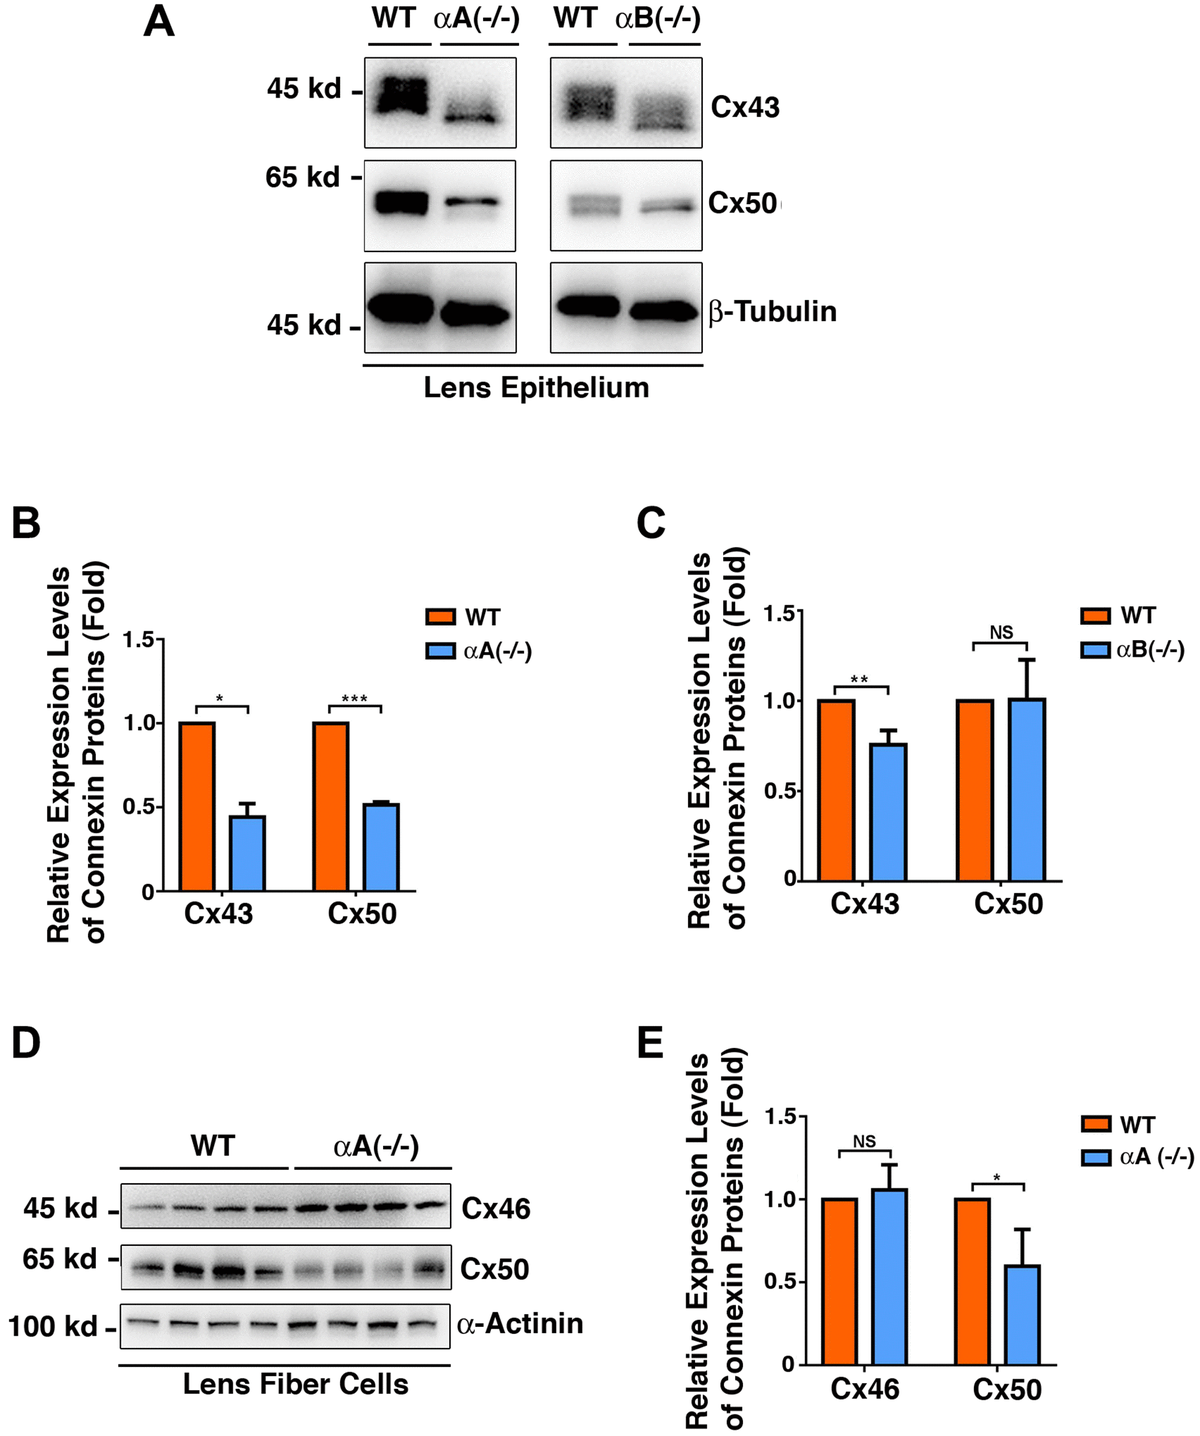 Differential expression patterns of the connexins Cx43, Cx46 and Cx50 in the epithelial cells of the αA-/- and αB-/- mouse lenses (Figure 10A–10C), and in the fiber cells of the αA-/- mouse lenses (Figure 10D–10E). (A) Western blot analysis of Cx43 and Cx50 in the lens epithelial cells of the αA-/- and αB-/- mice. β-Tubulin was showed as a loading control. (B) & (C) Quantification of the western blot results in (A). (D) Western blot analysis of Cx43 and Cx50 in the lens fiber cells of the αA-/- mice. α-Actinin was showed as a loading control. (E) Quantification of the western blot results in (D). NS, not significant, *p **p ***p 